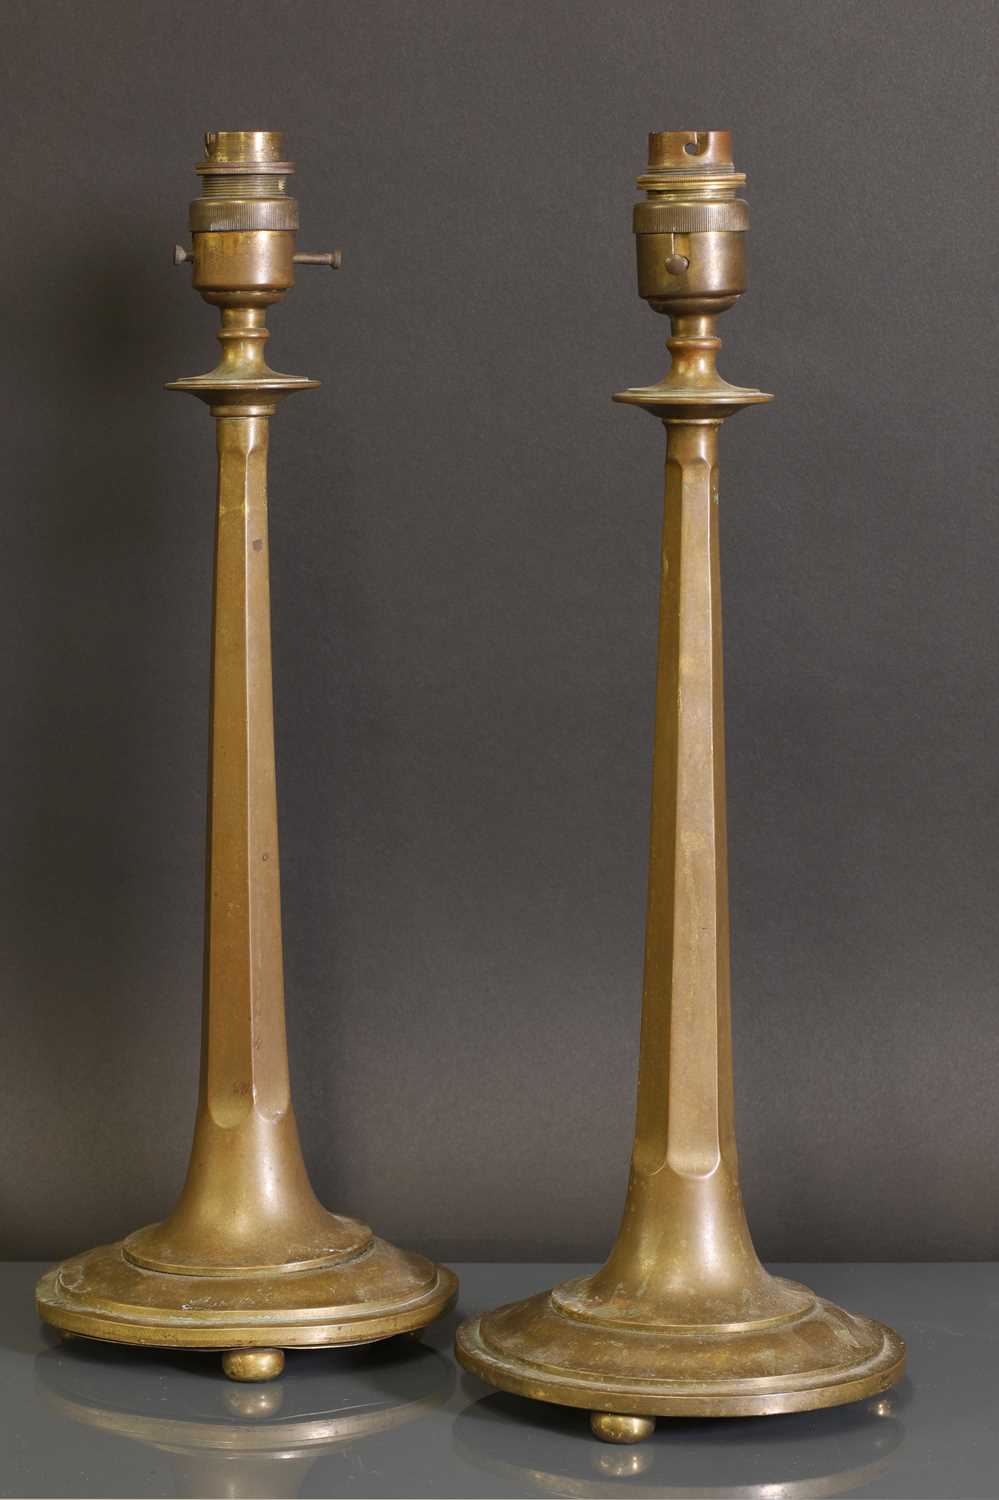 Lot 45 - A pair of Arts and Crafts bronze candlesticks